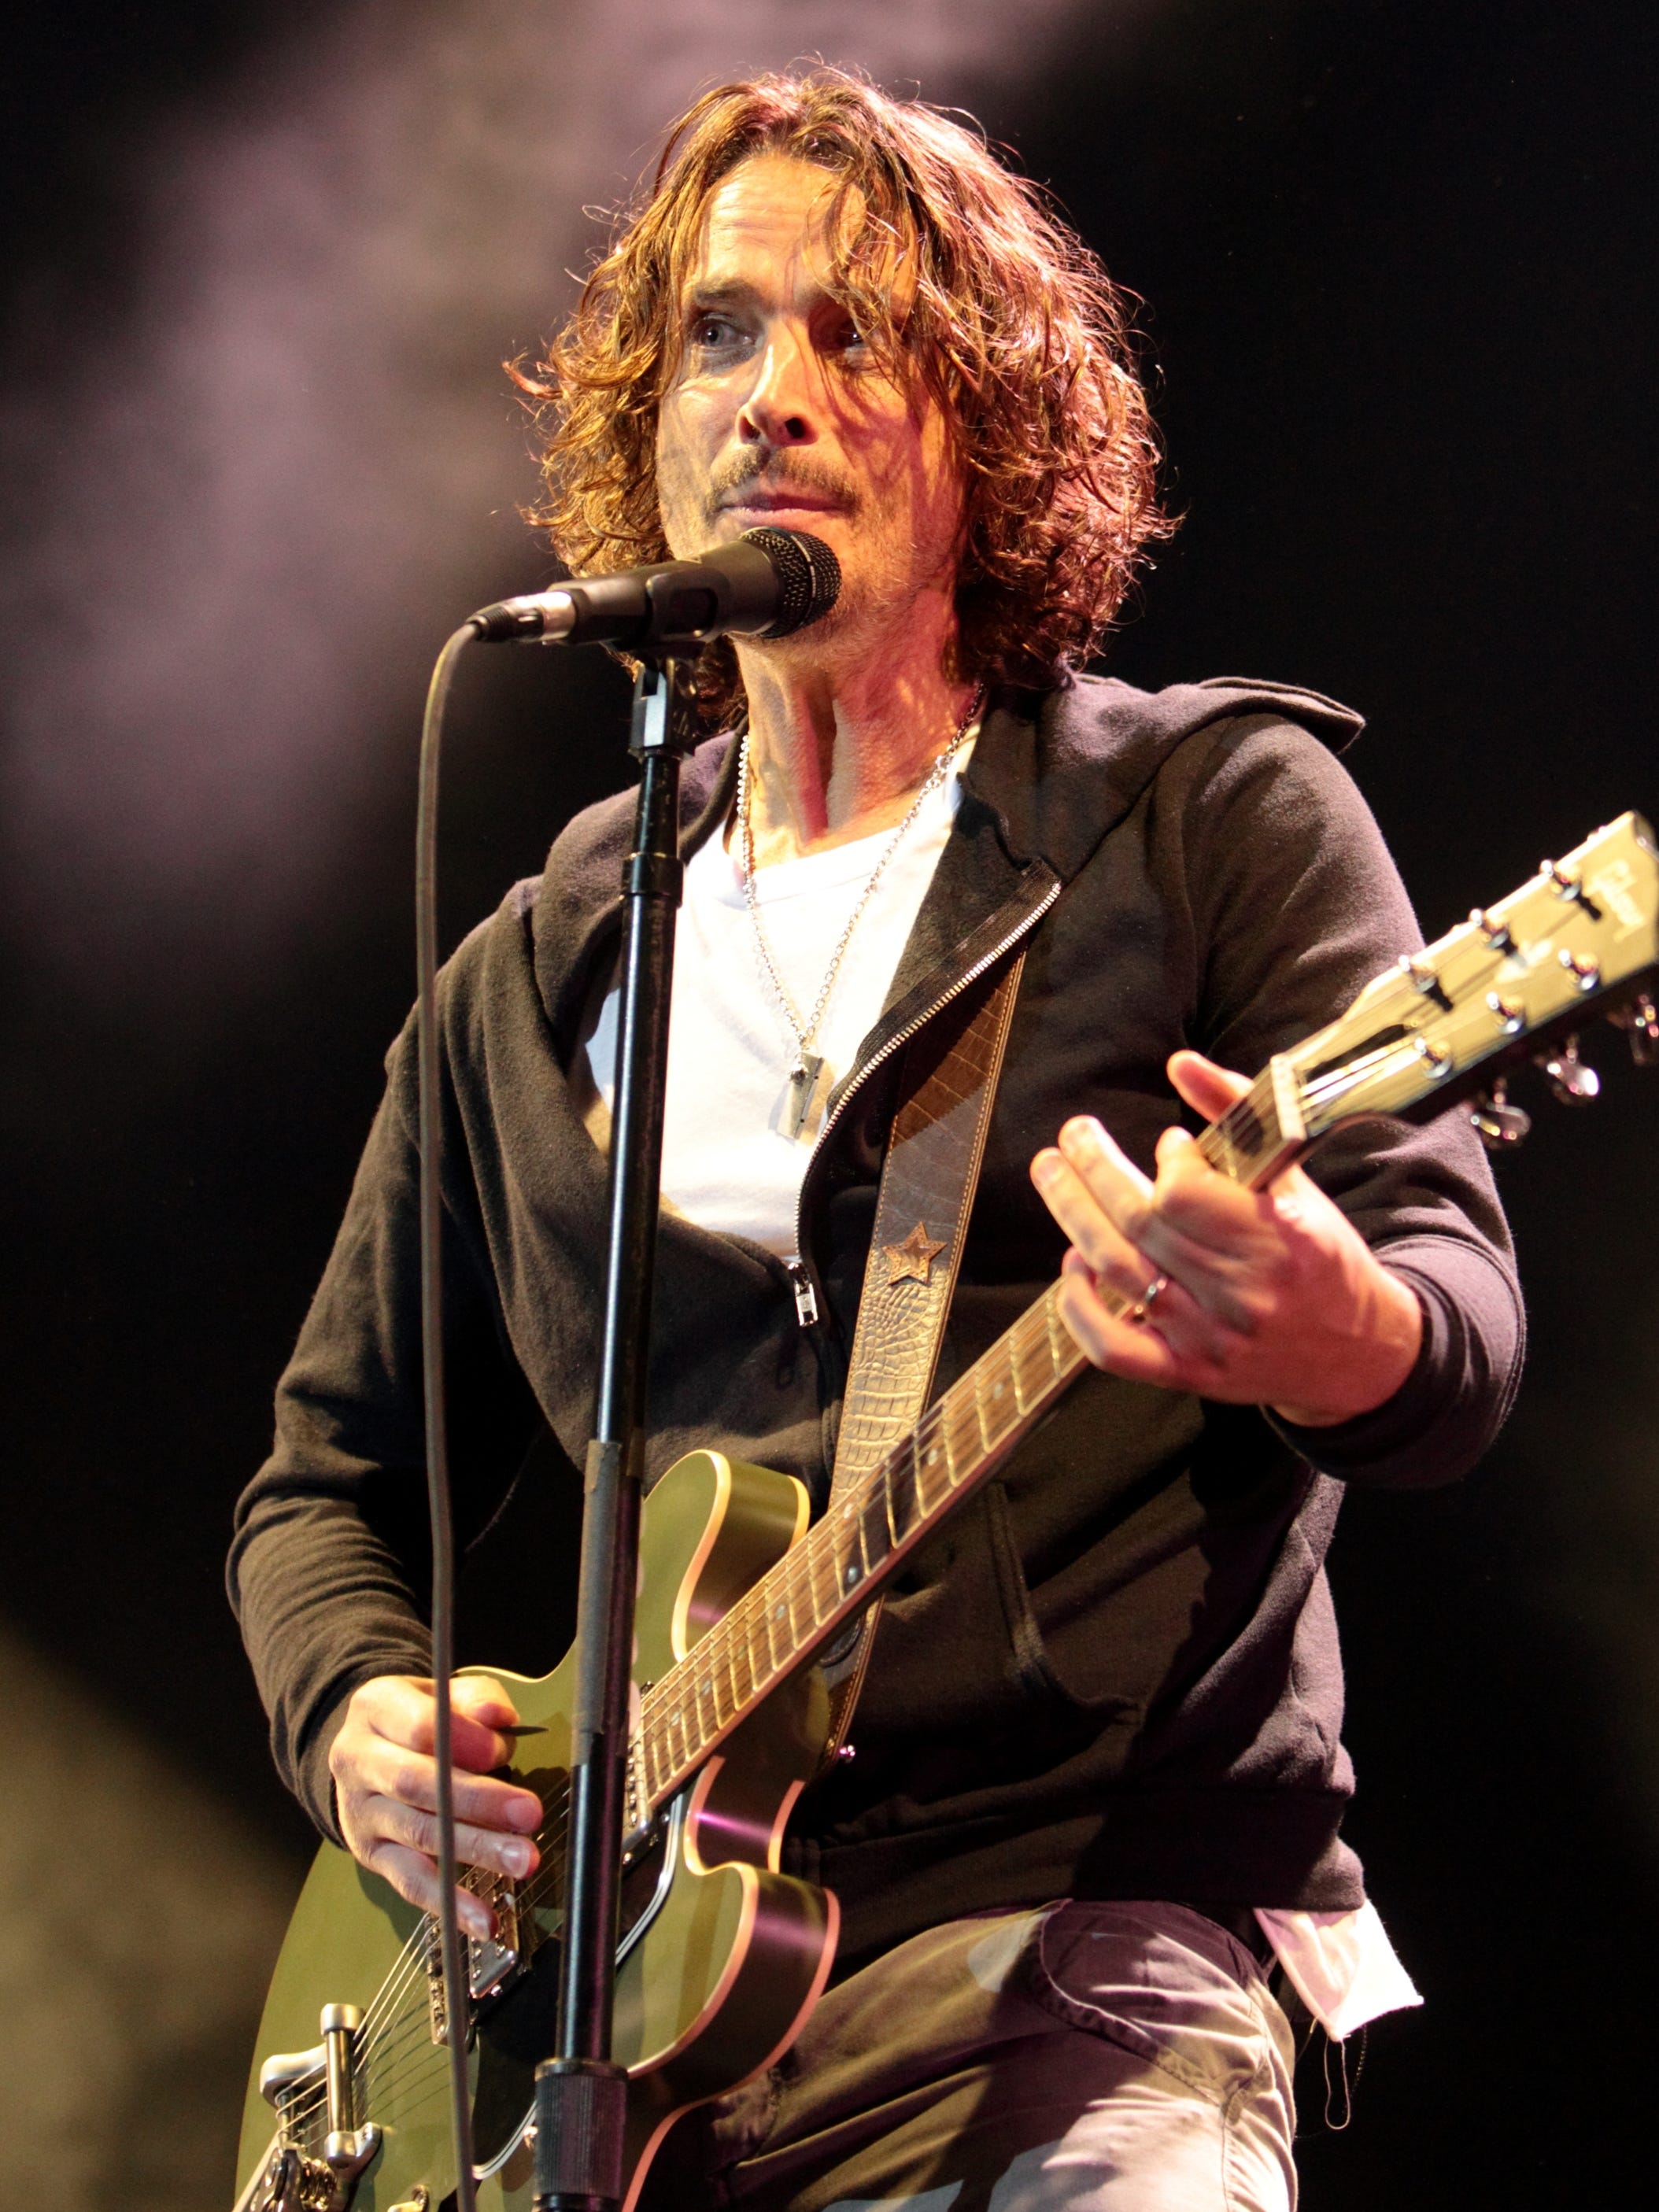 A May 8, 2013, photo shows Chris Cornell performing with Soundgarden at the Susquehanna Bank Center in Camden, N.J.